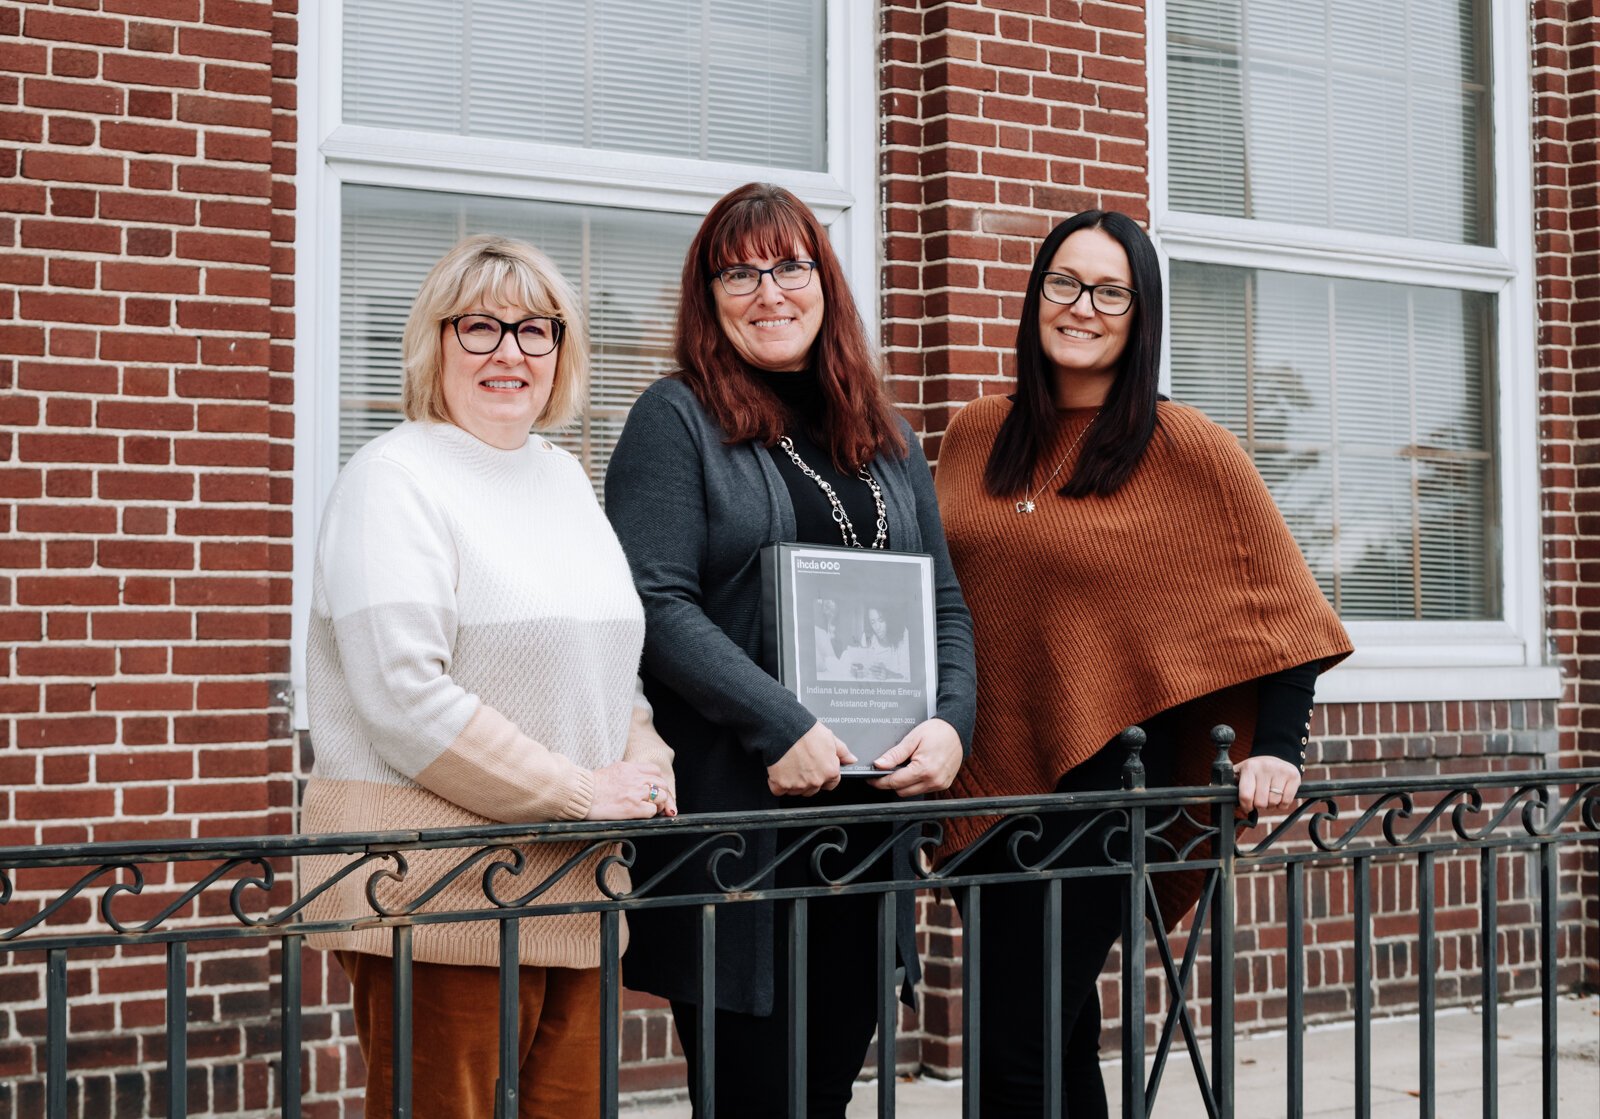 Brightpoint VP of Community Services, Pam Brookshire, left, and Family Support Services Manager, Lesa Cassel, center, with Dana Berkes, right, Public Affairs & Economic Development Manager at NIPSCO in front of Brightpoint at 227 E. Washington Blvd.